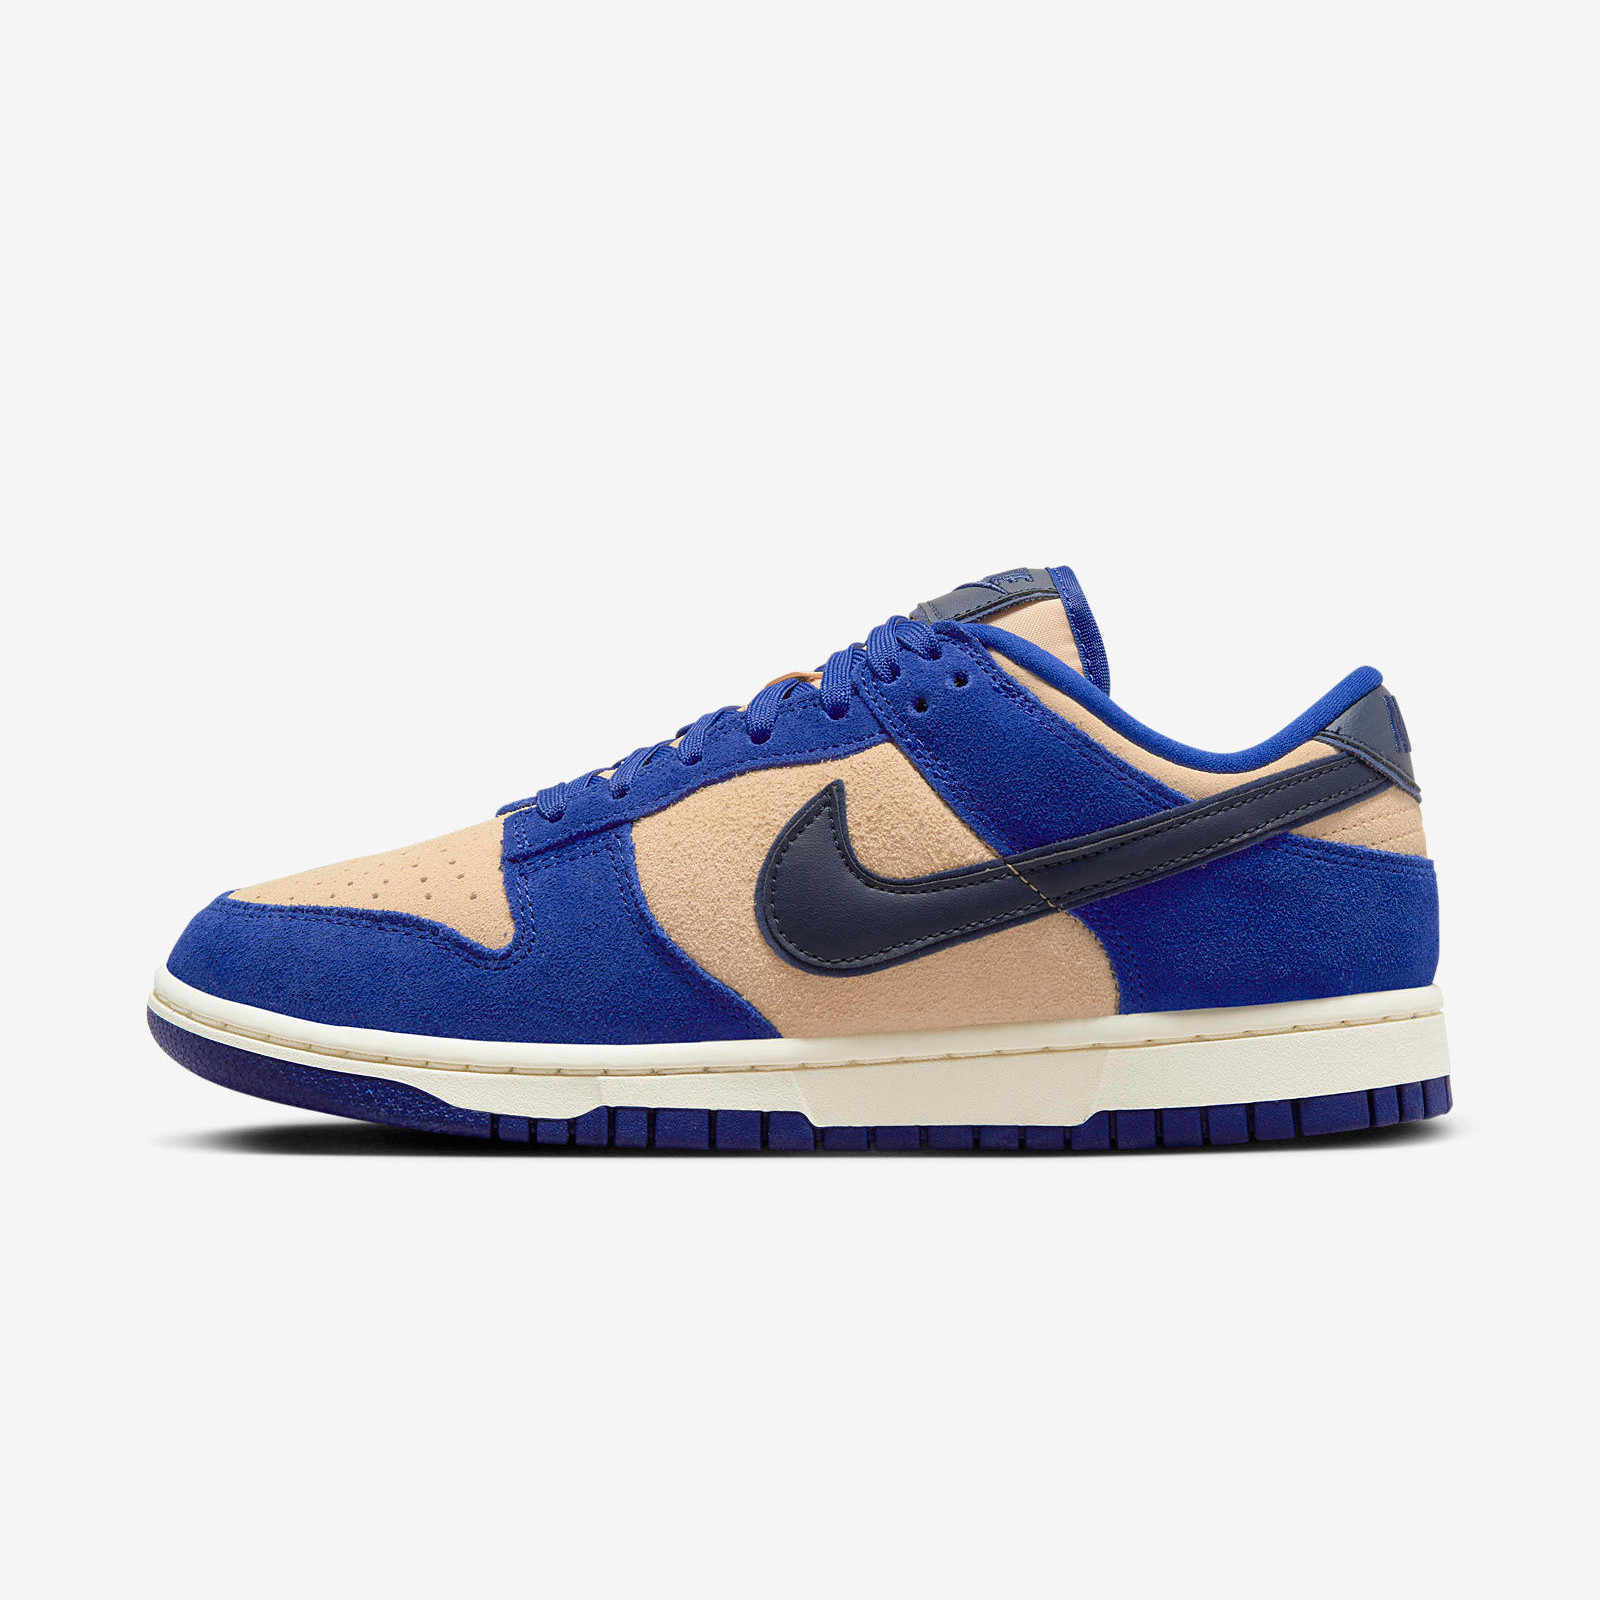 Nike Dunk Low
« Blue Suede »